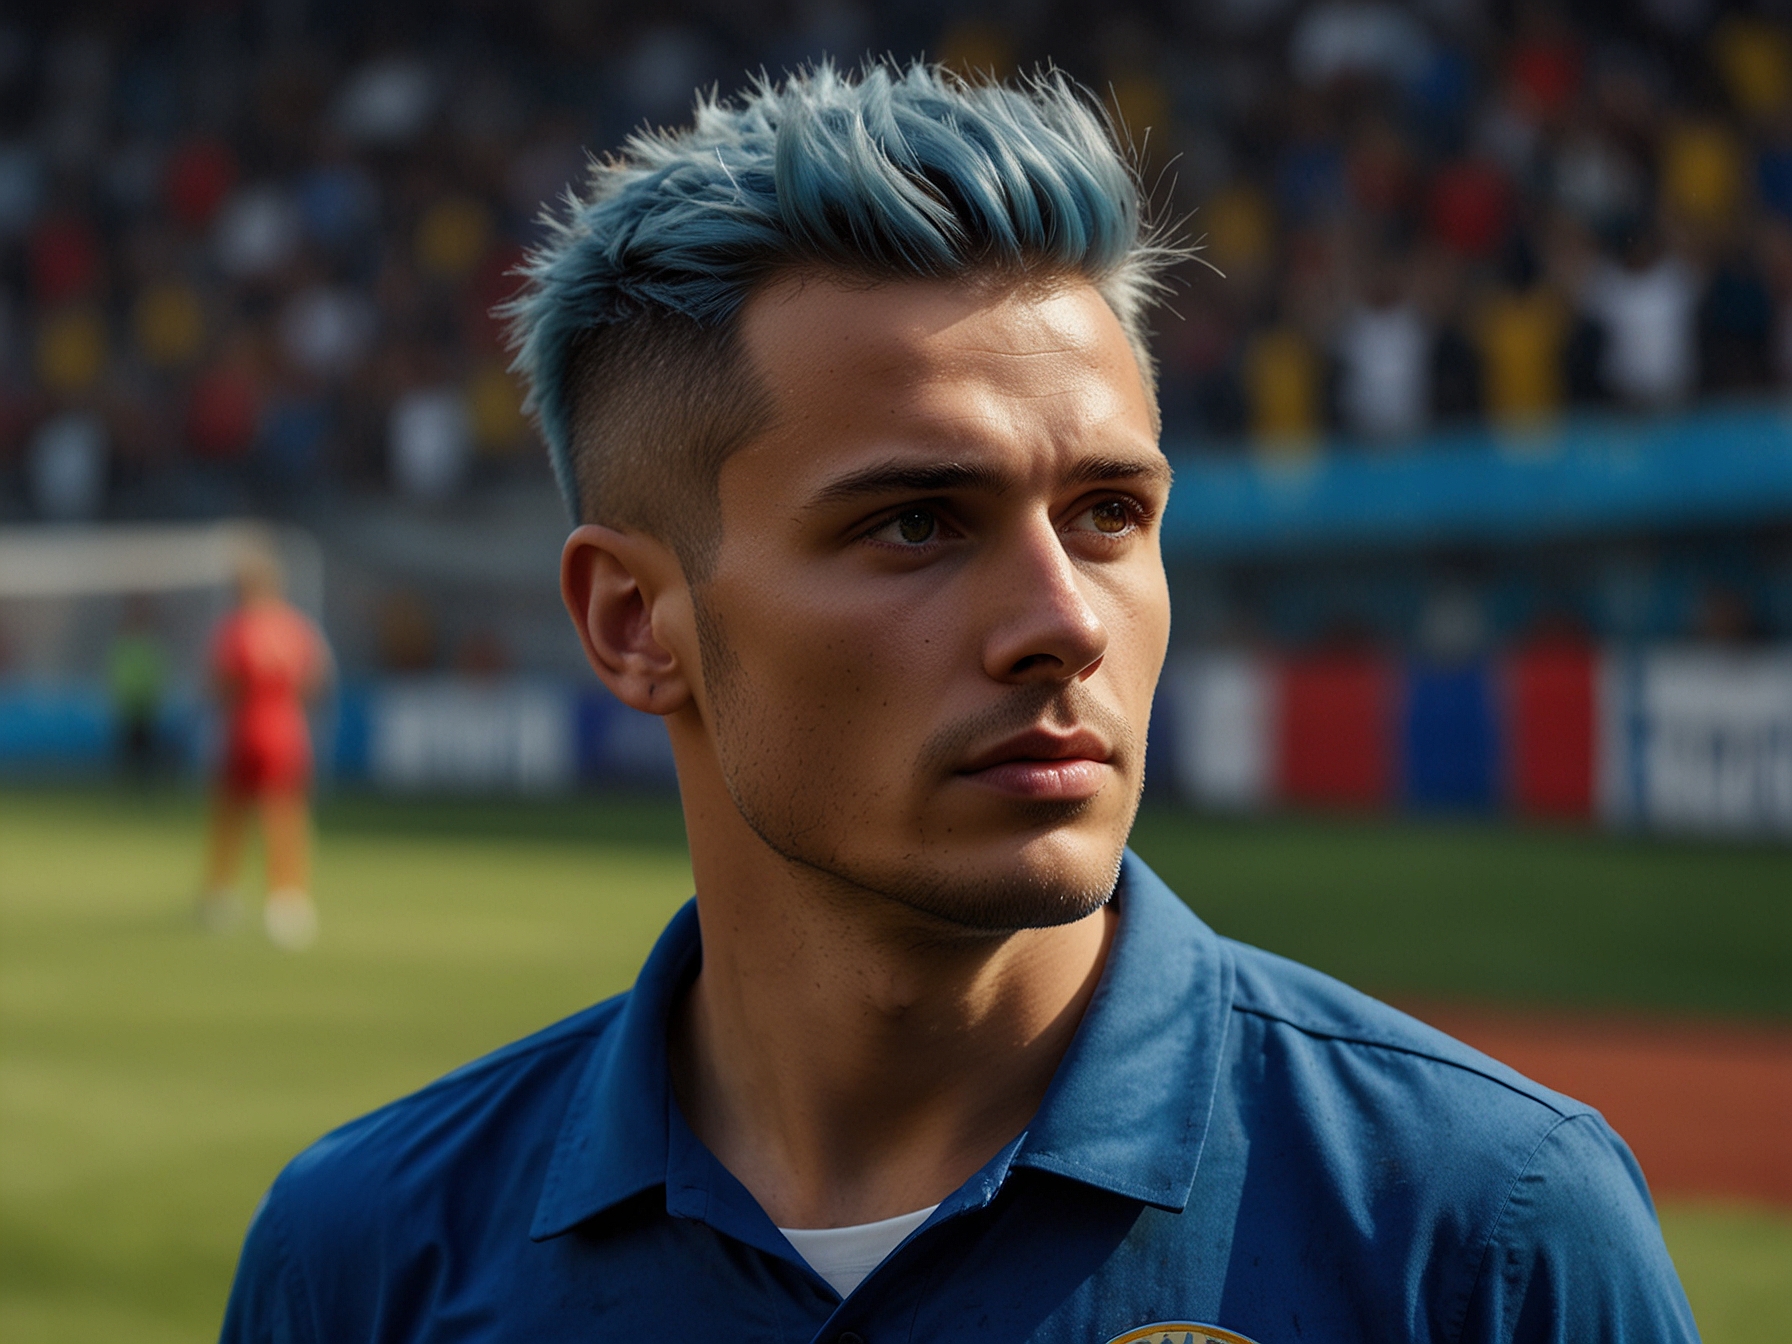 Andrei Rațiu walks onto the field for Romania’s Euro 2024 match against Ukraine, flaunting his striking electric blue hair, while fans and commentators react with mixed feelings.